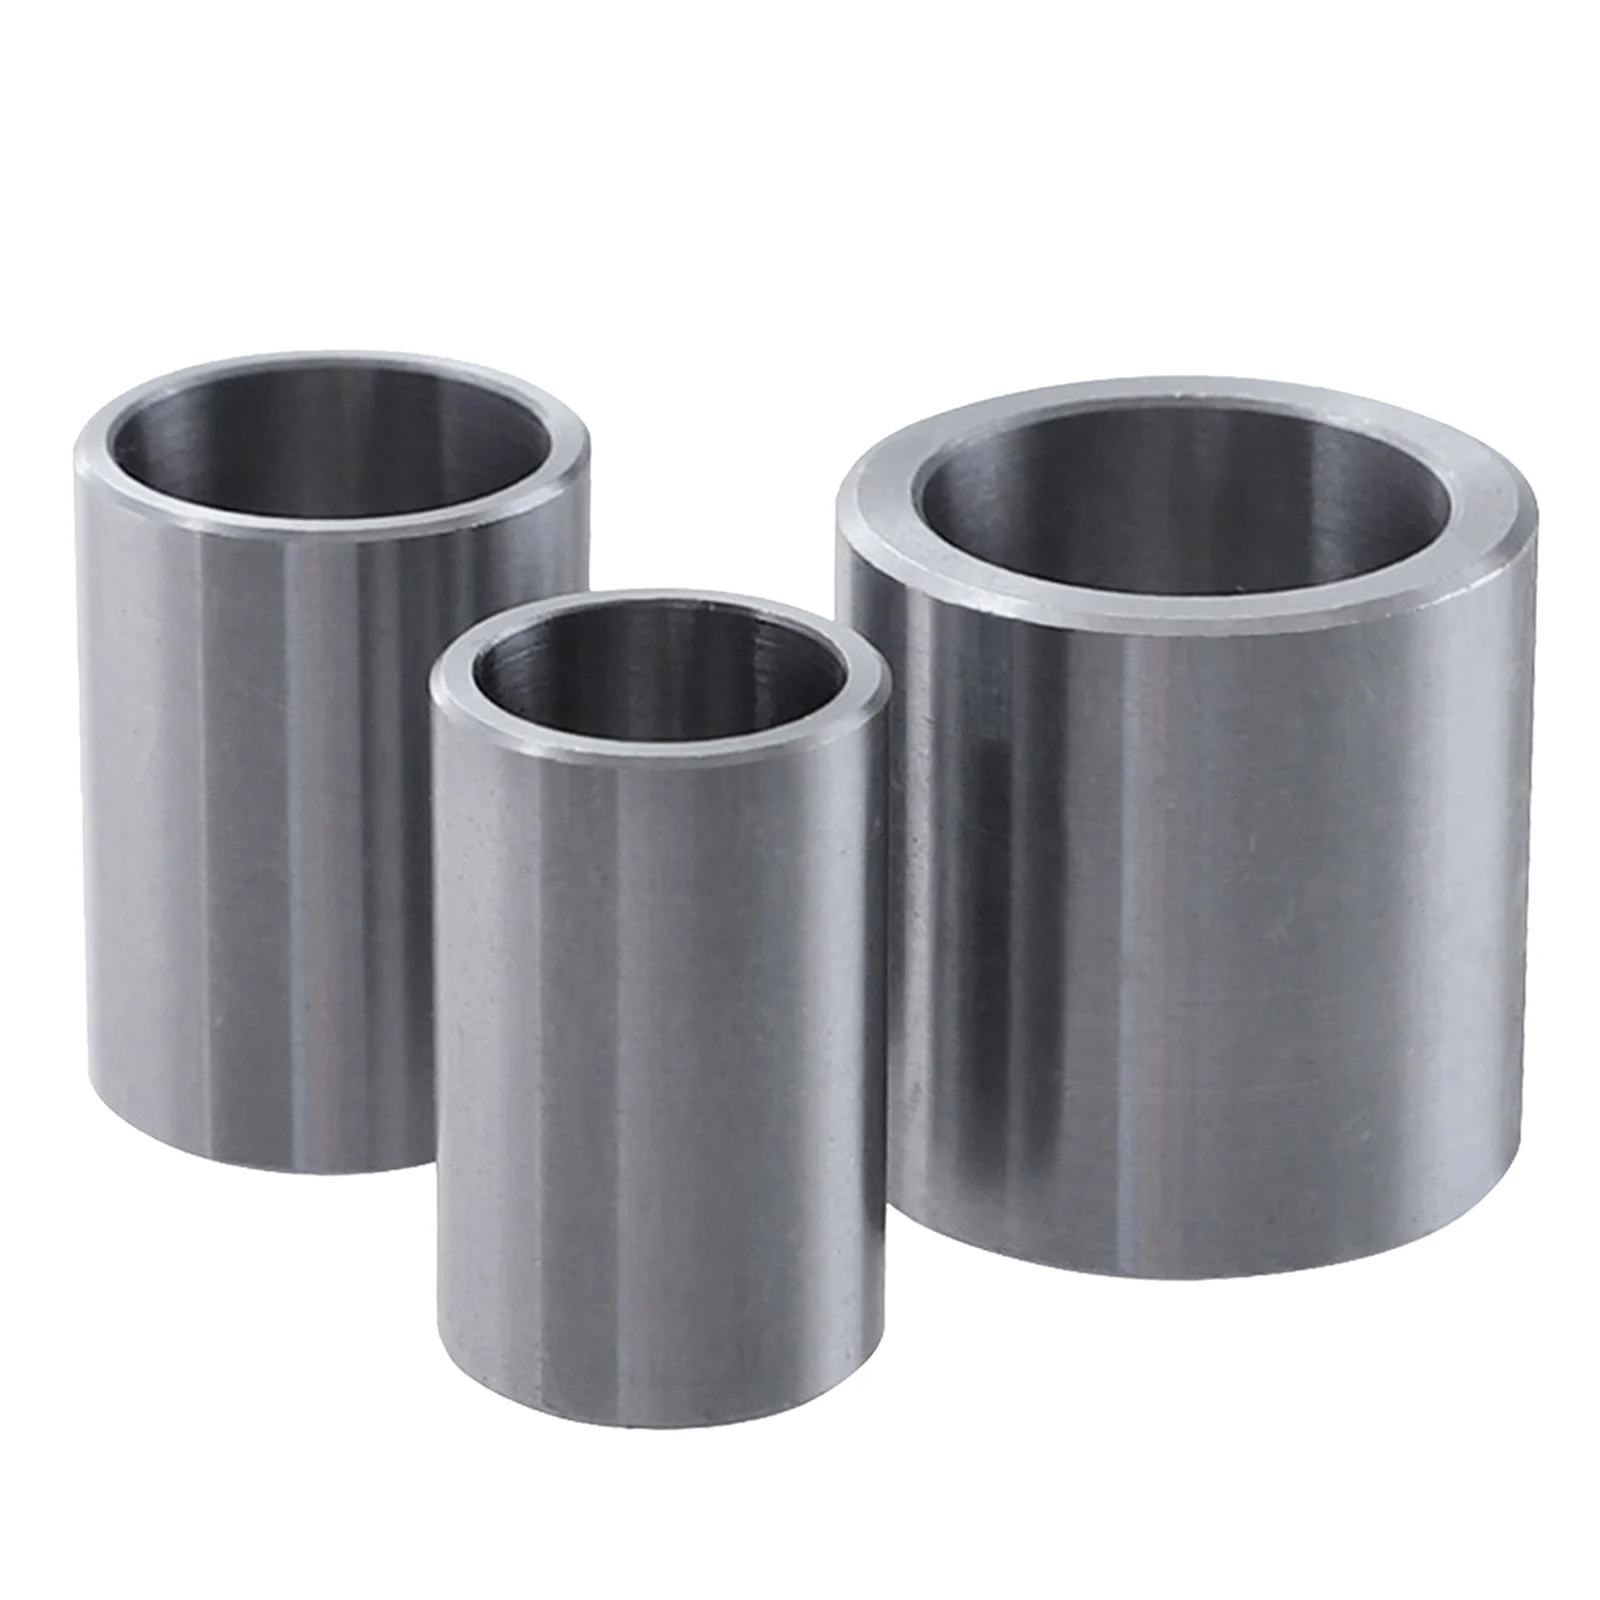 3 Sizes Reducing Bushing Adapters Reduced Diameter Hole for Bench Grinding Wheels Stainless Steel Rust-prevention Silver